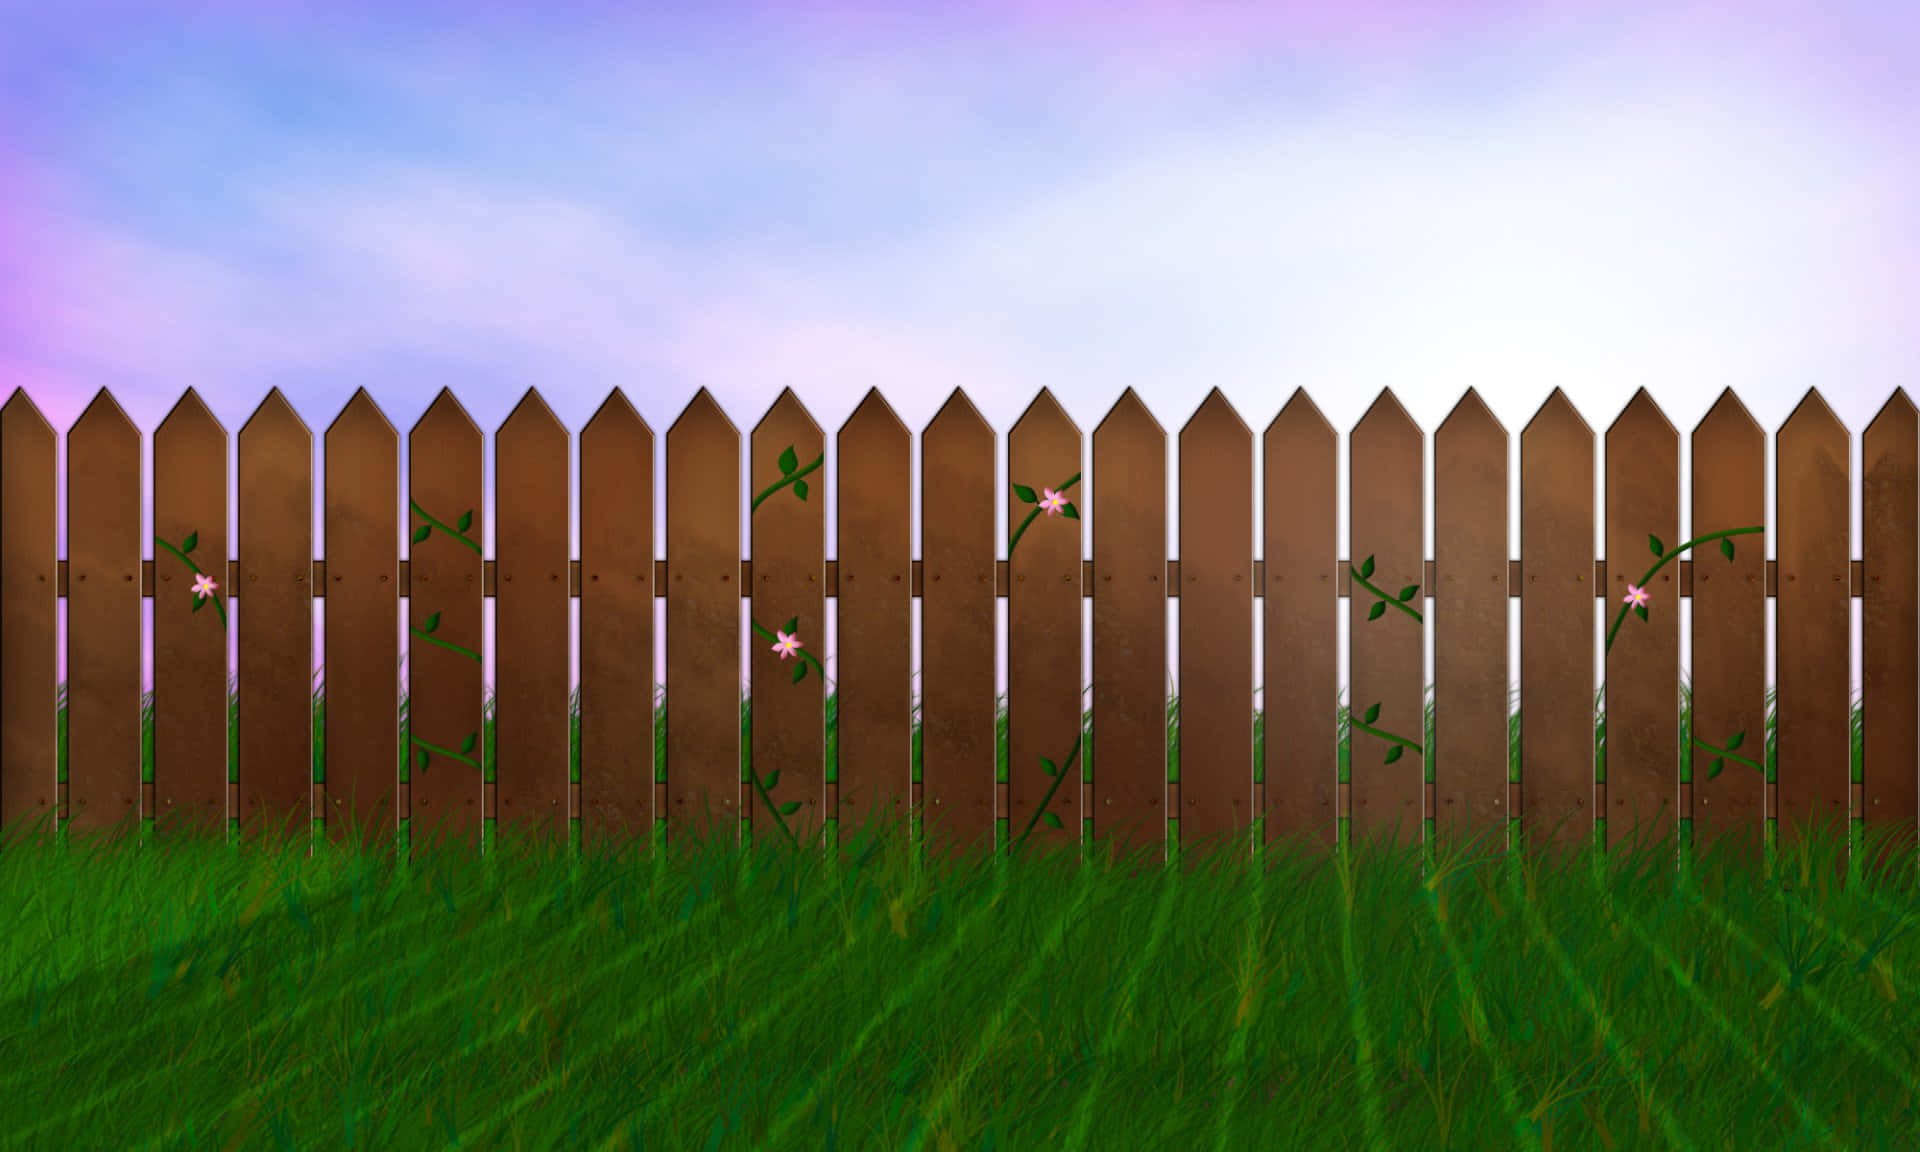 Sturdy Fence Protecting Home